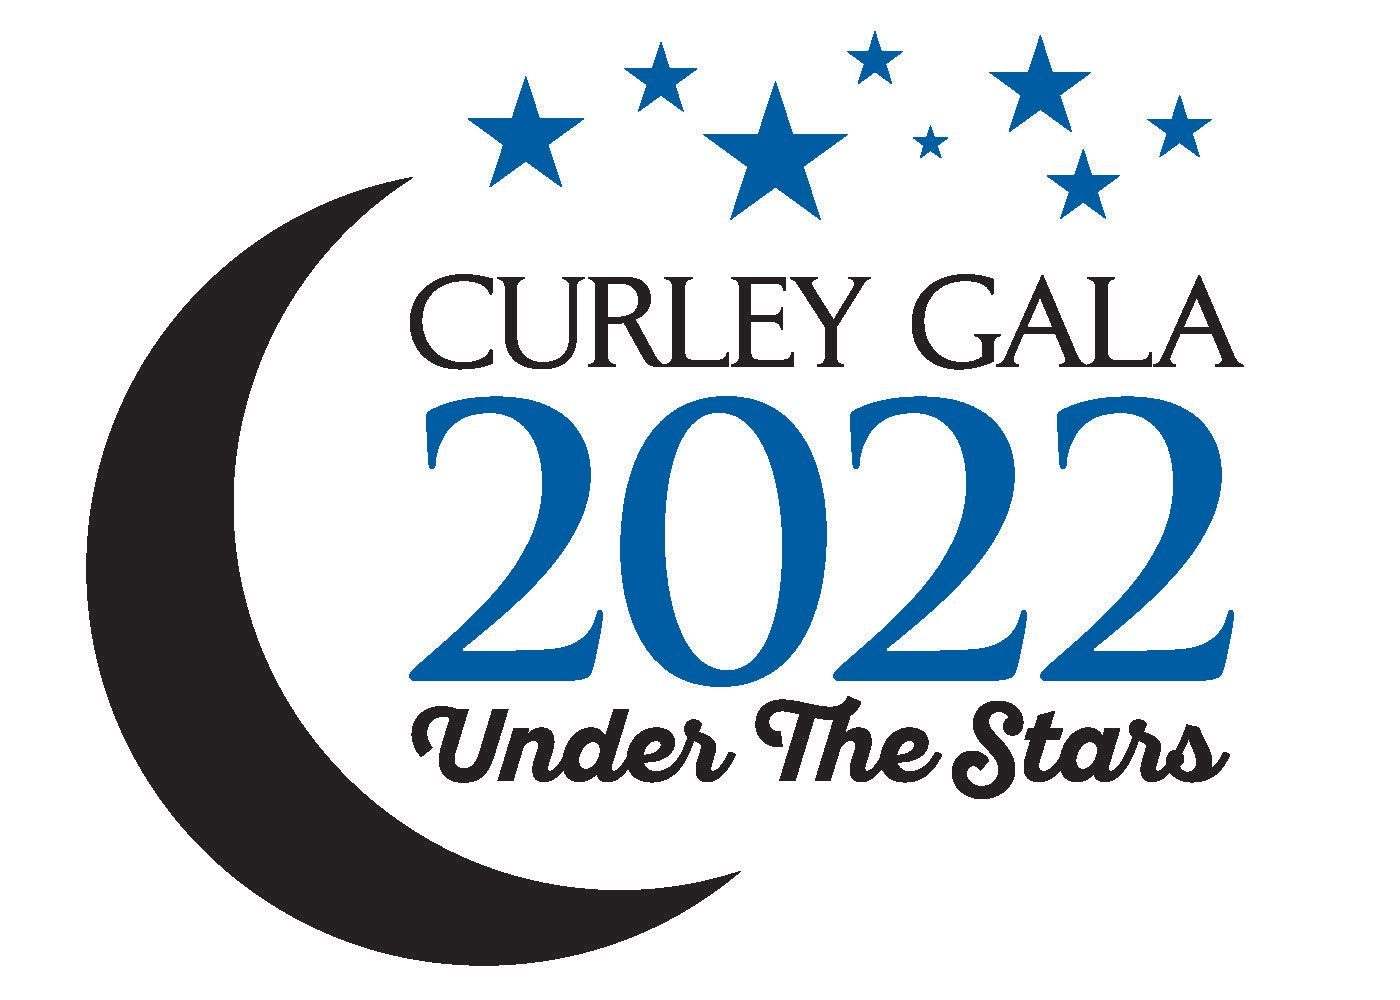 The Curley Gala